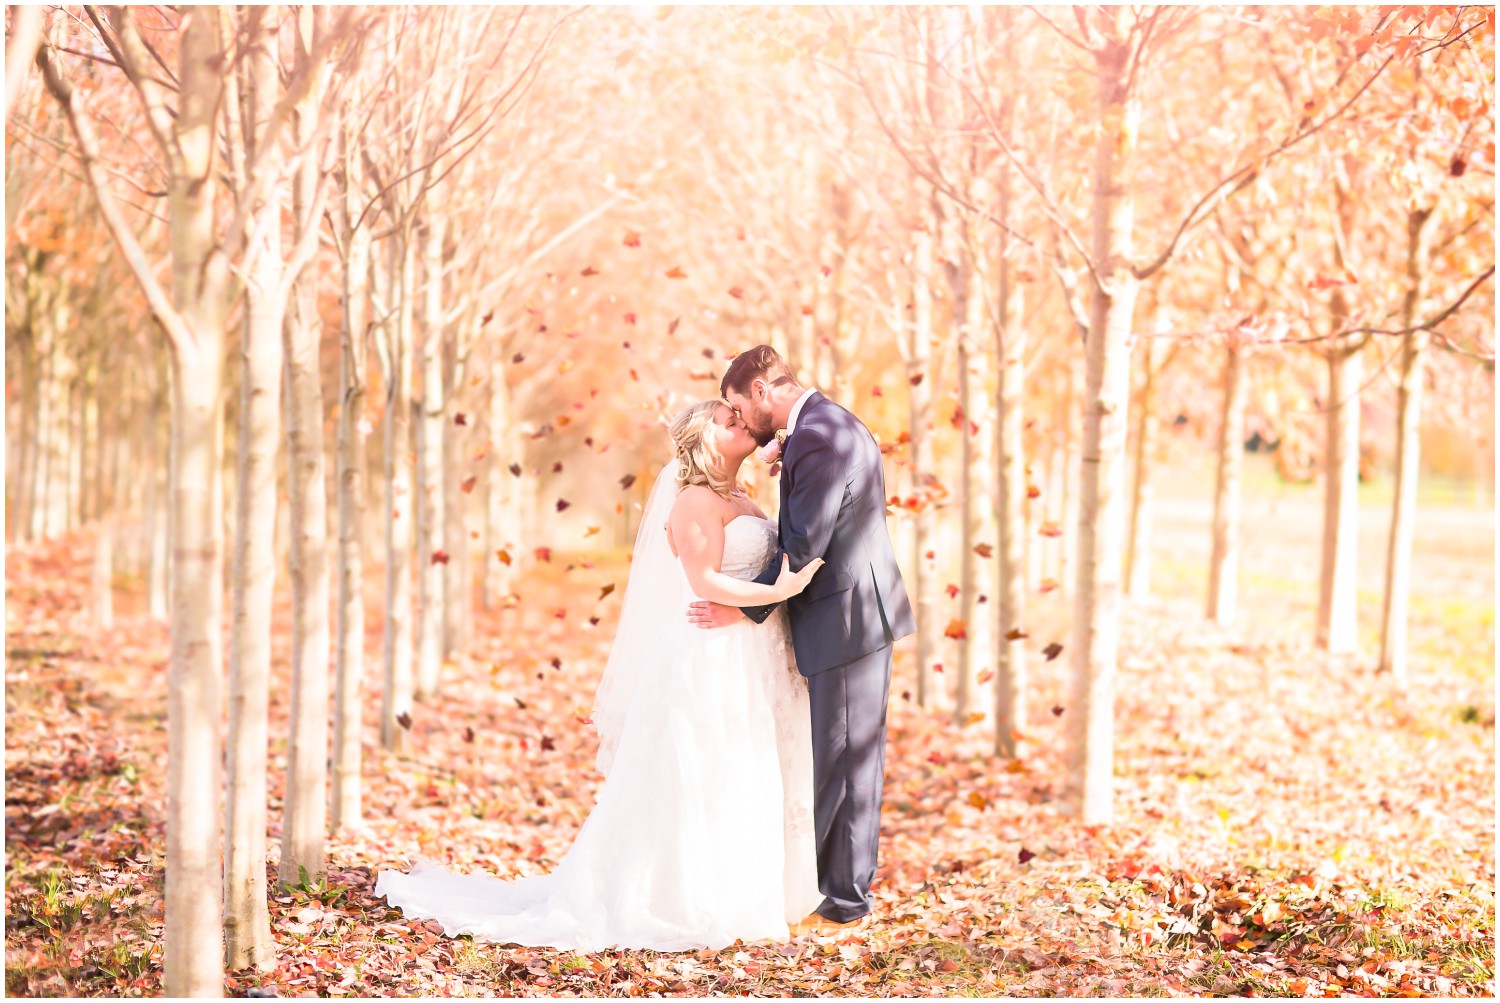 A Rustic Autumn Wedding at The Snohomish Event Center